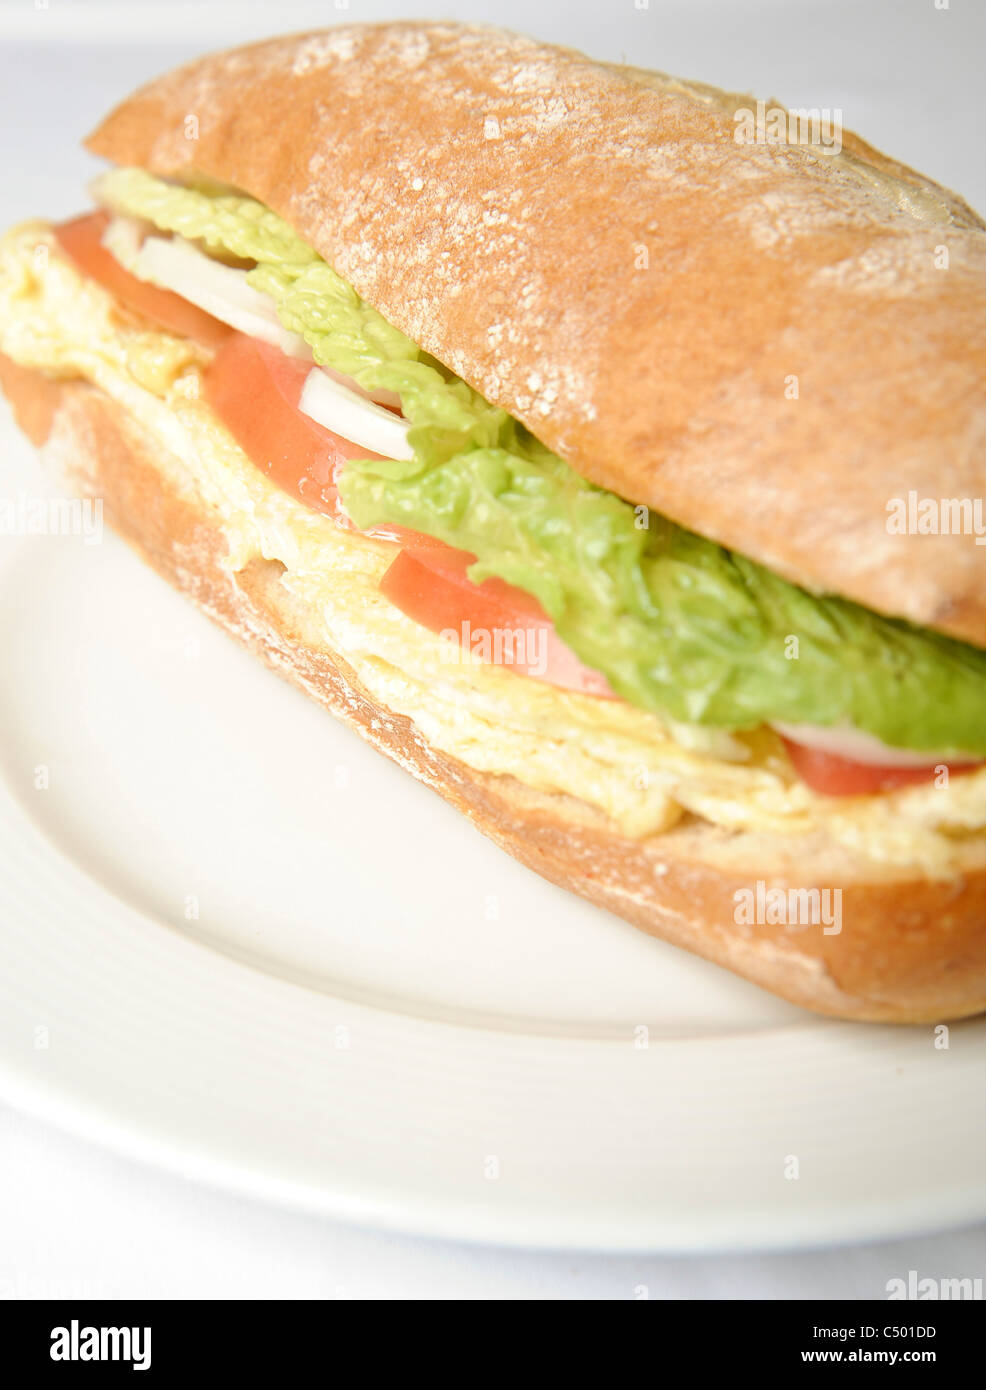 Egg sandwich in a Ciabatta roll with tomato and lettuce on a white plate Stock Photo